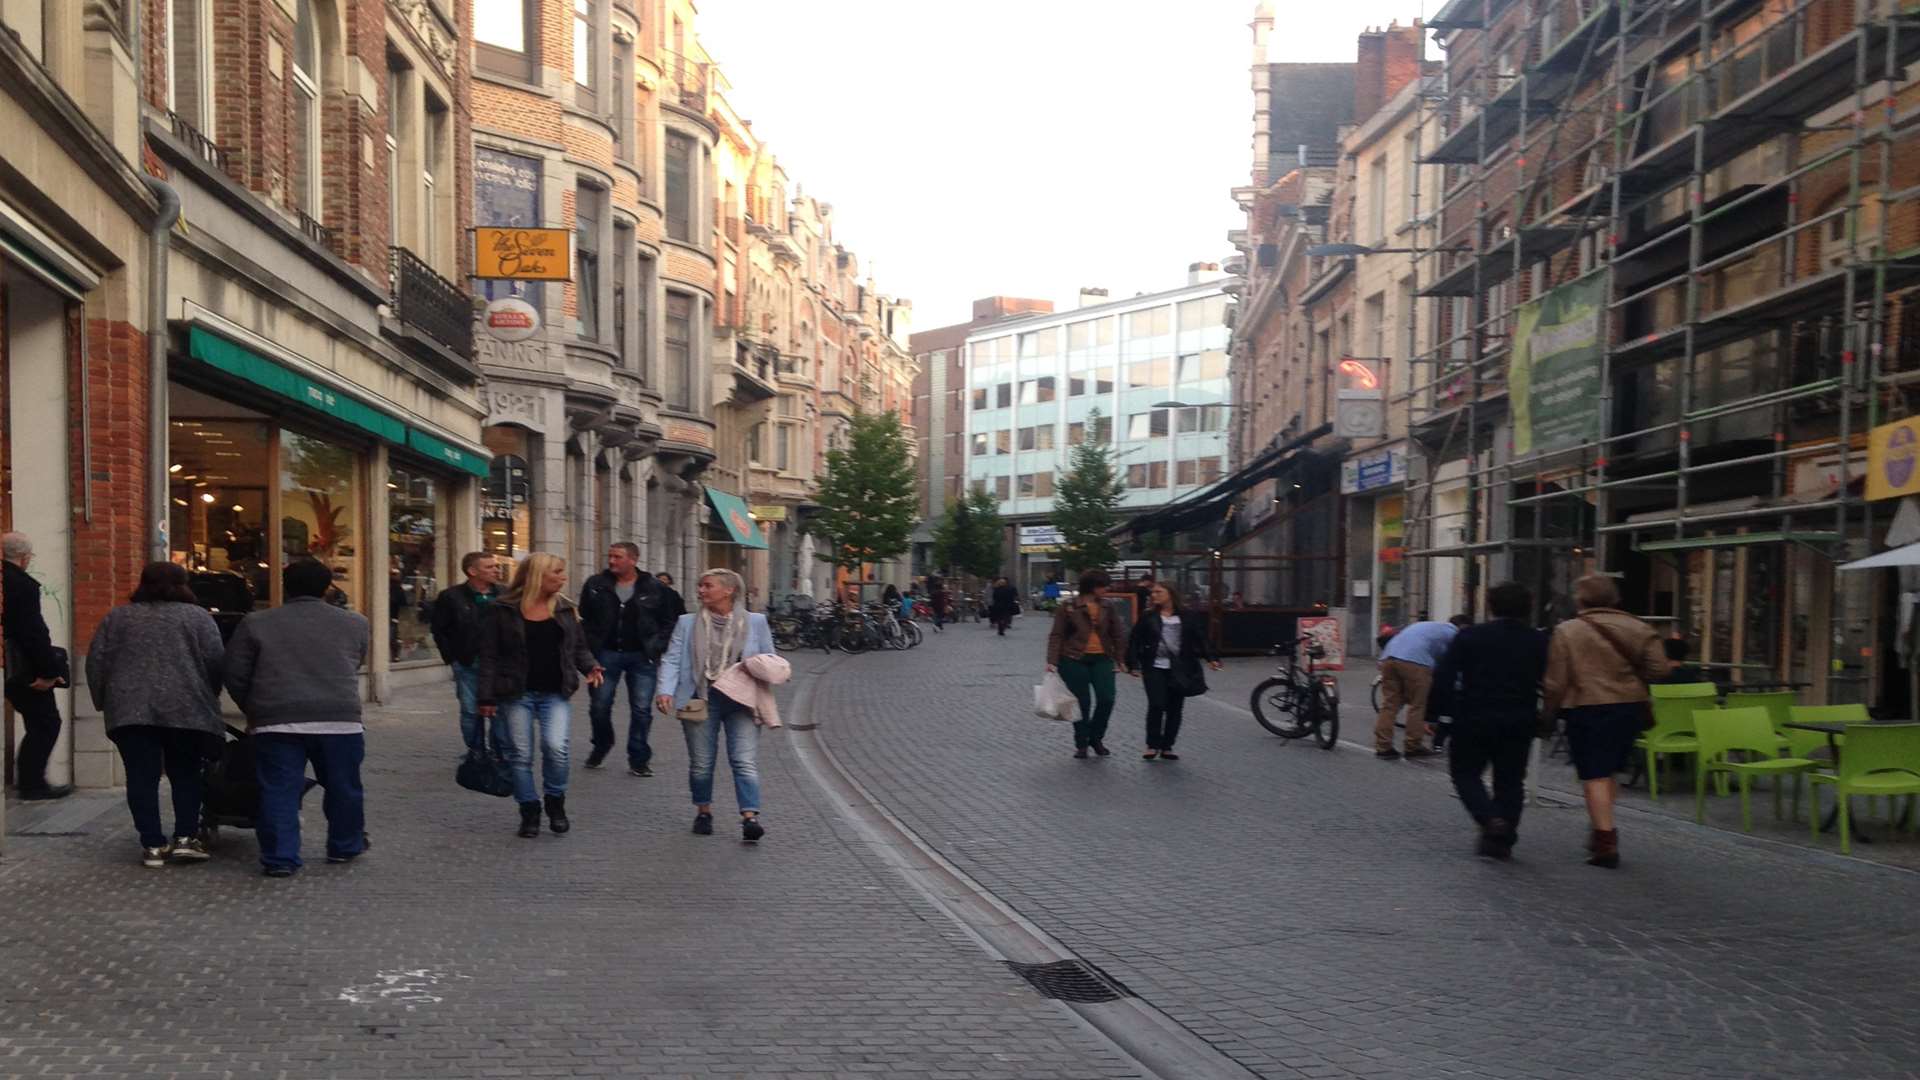 A quiet Sunday afternoon in the market streets of Leuven. Packed full with independent retailers